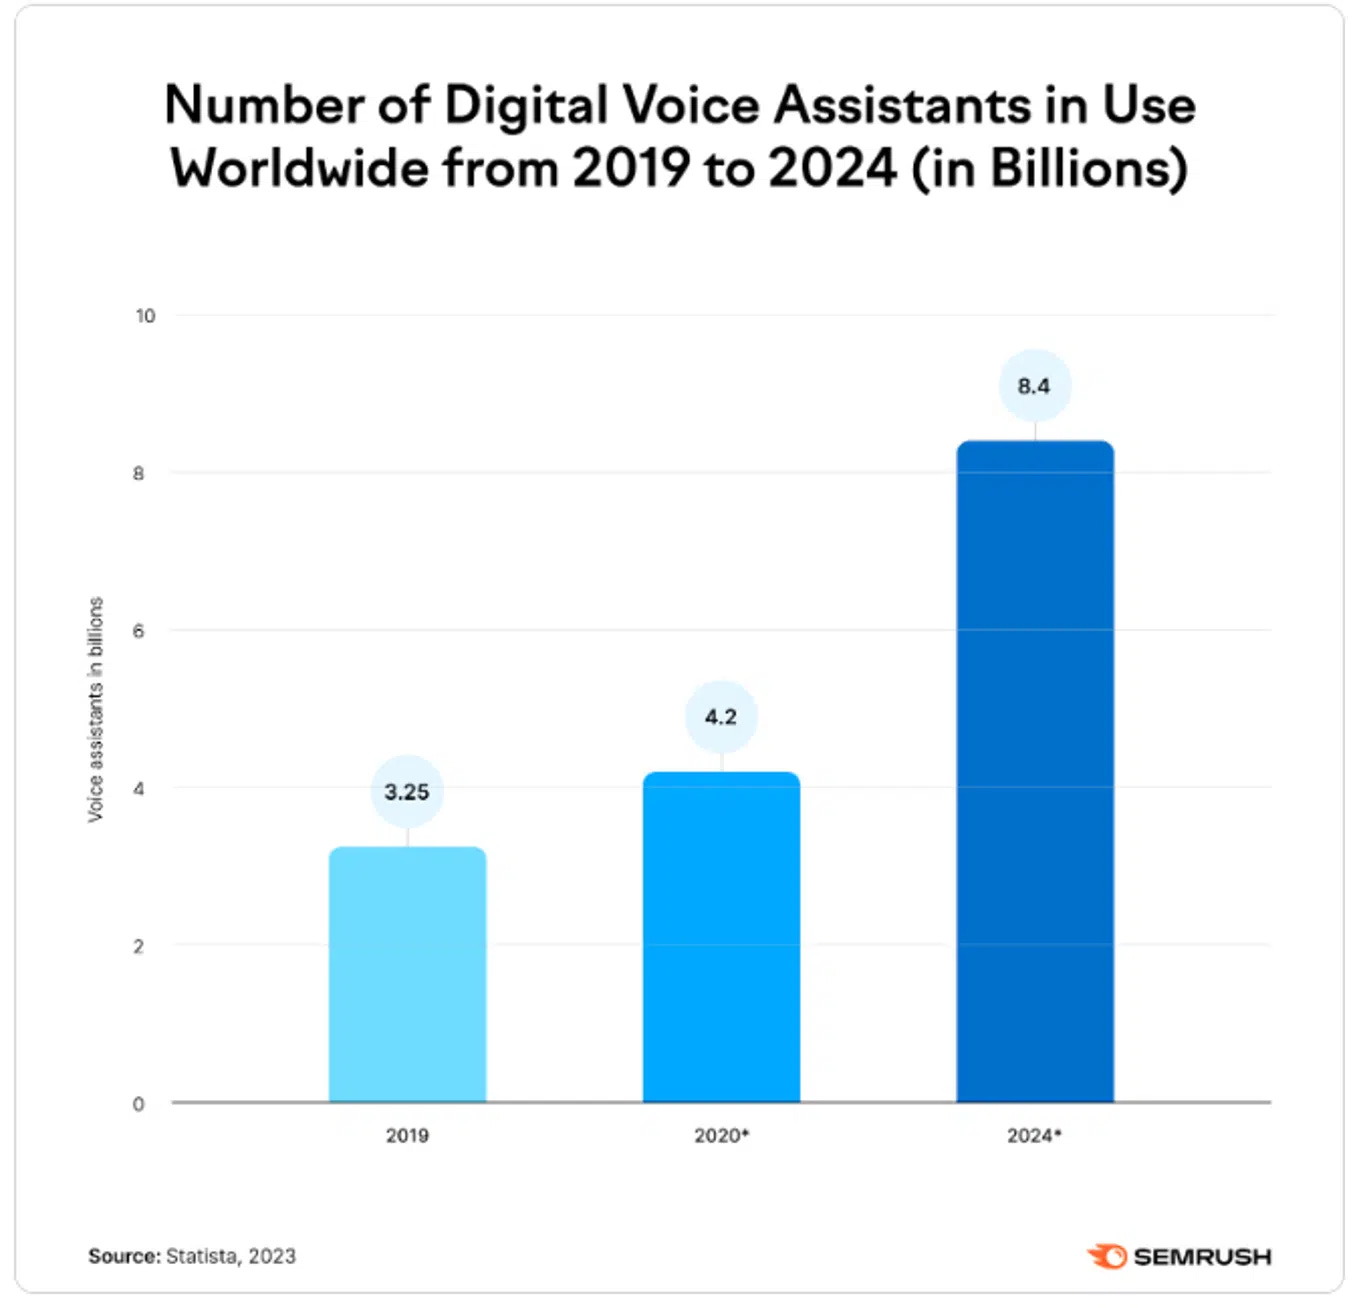 Number of digital voice assistants in use worldwide from 2019 to 2024